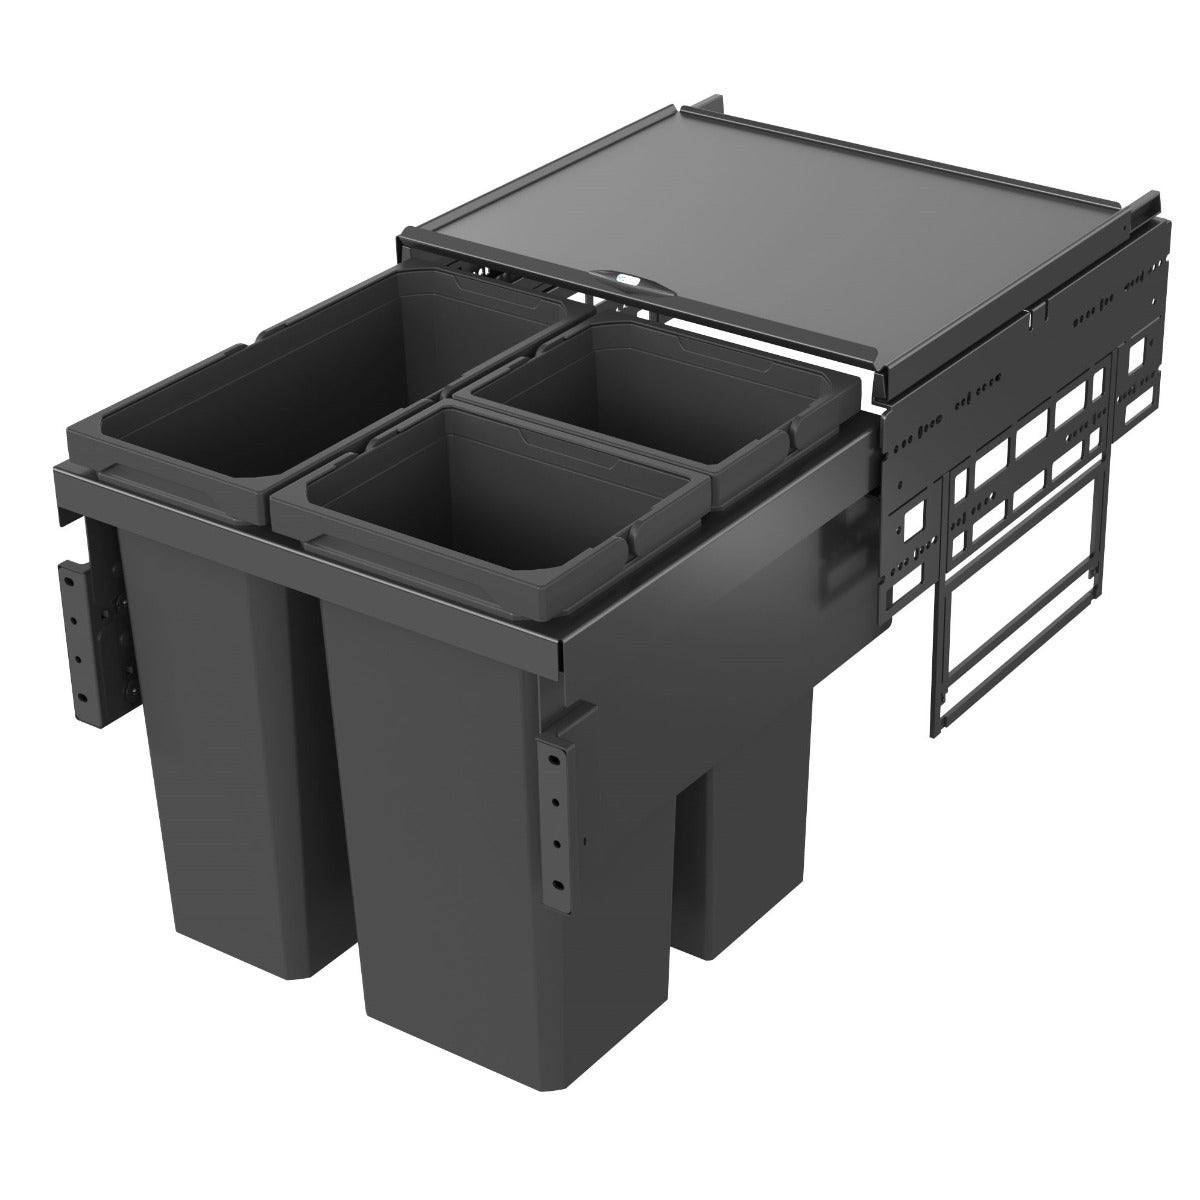 This Vauth-Sagel ES-Pro 3-Compartment 46L In-cupboard Recycling Bin has all you need to create  a hidden kitchen bin